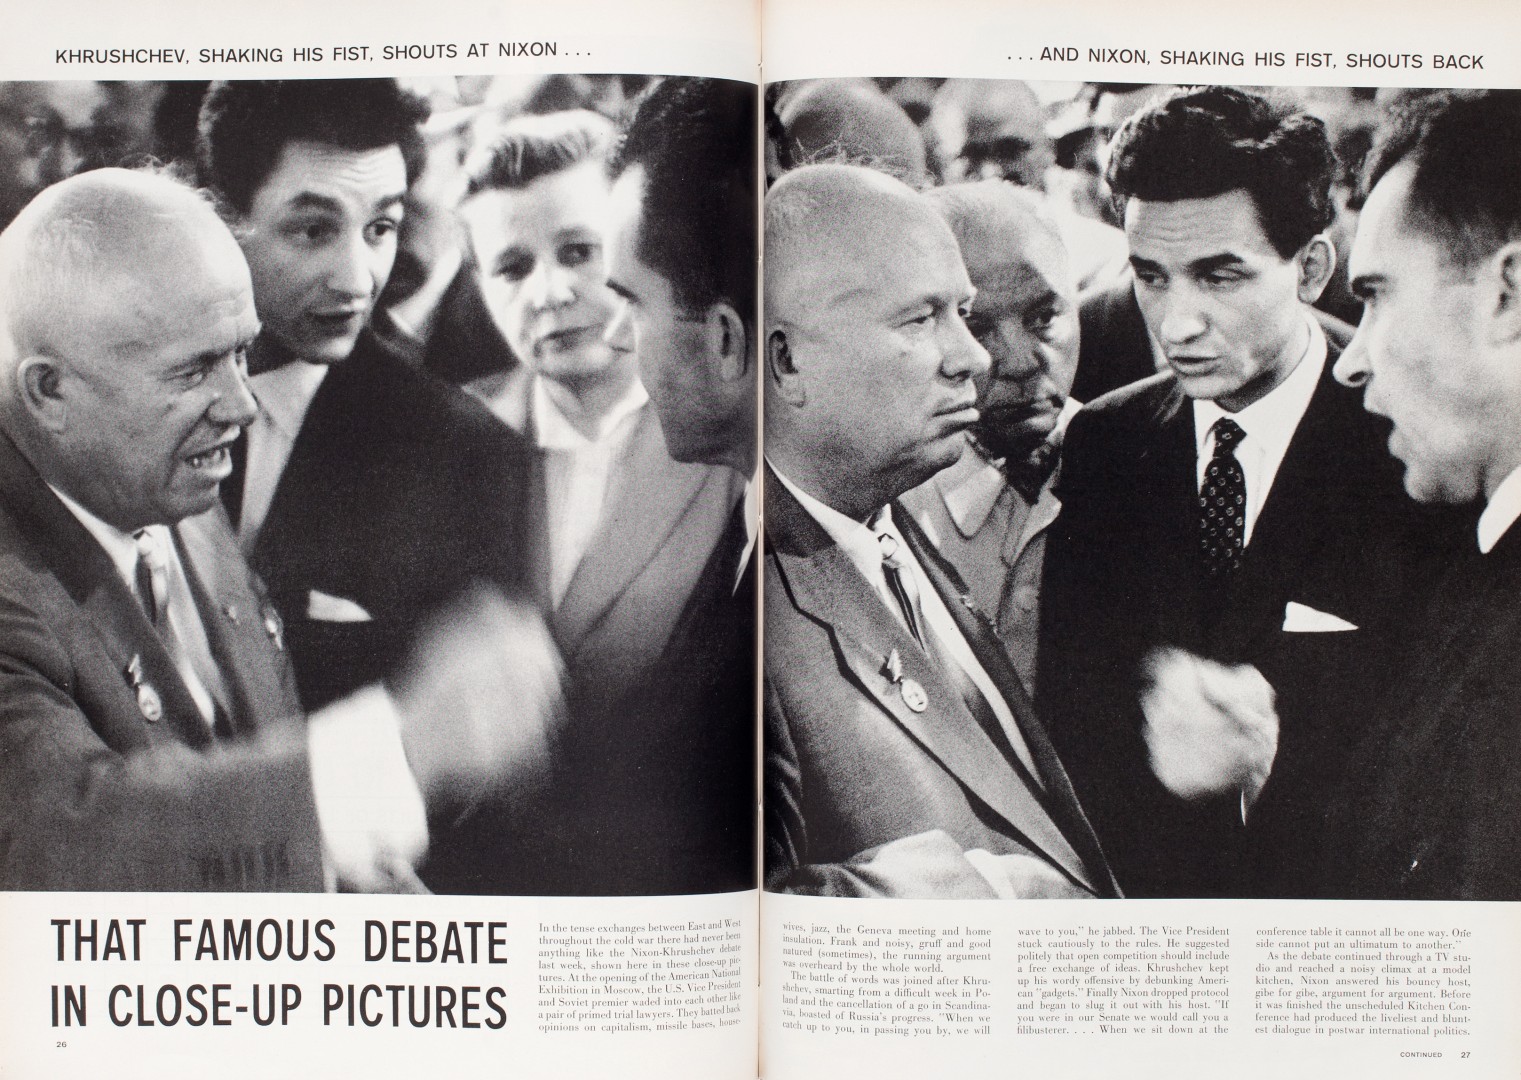 Magnum Photographic Agency photographs of the famous Kitchen Debate between Richard Nixon and Nikita Khrushchev, 1959.